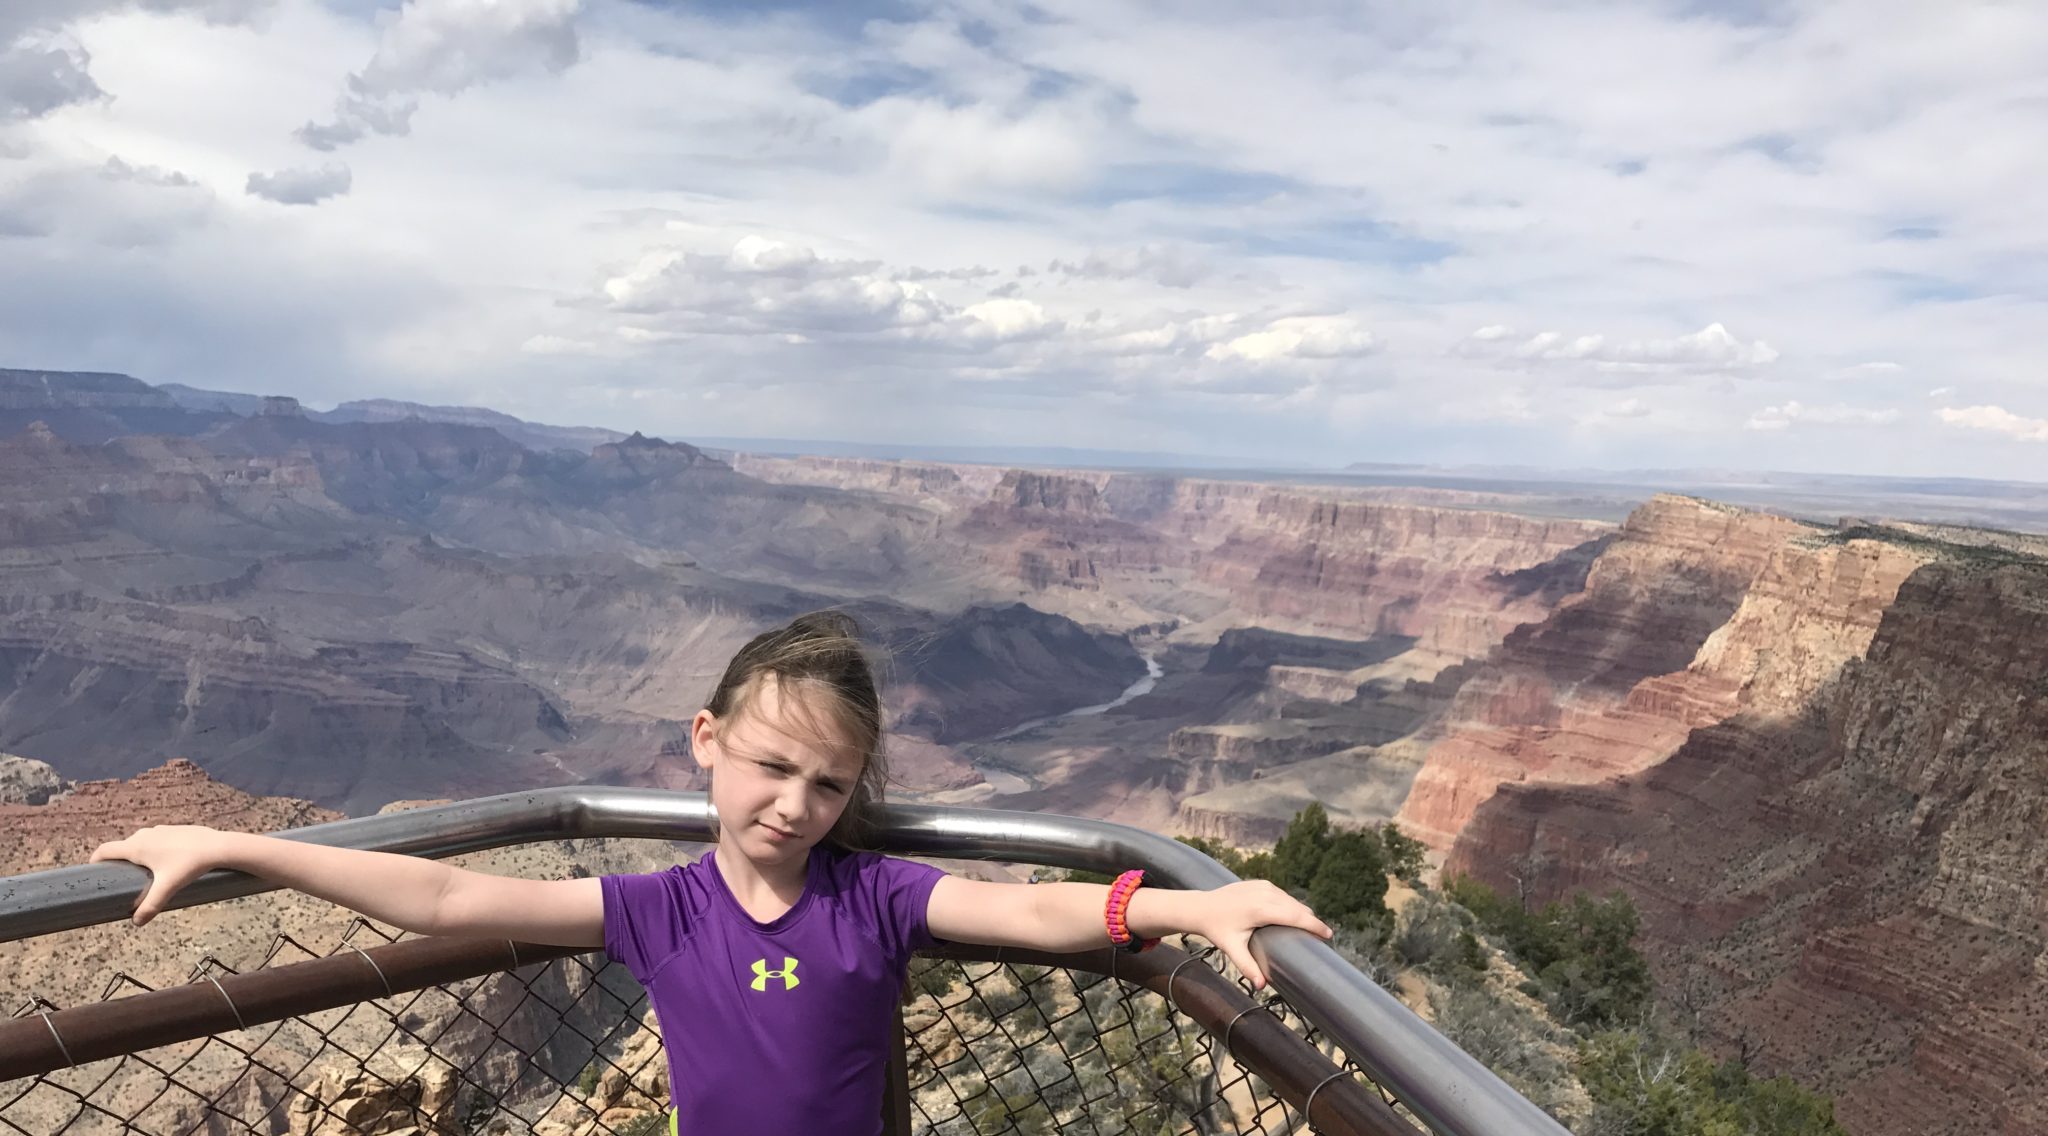 Going to the Grand Canyon: Tips from Ladybug